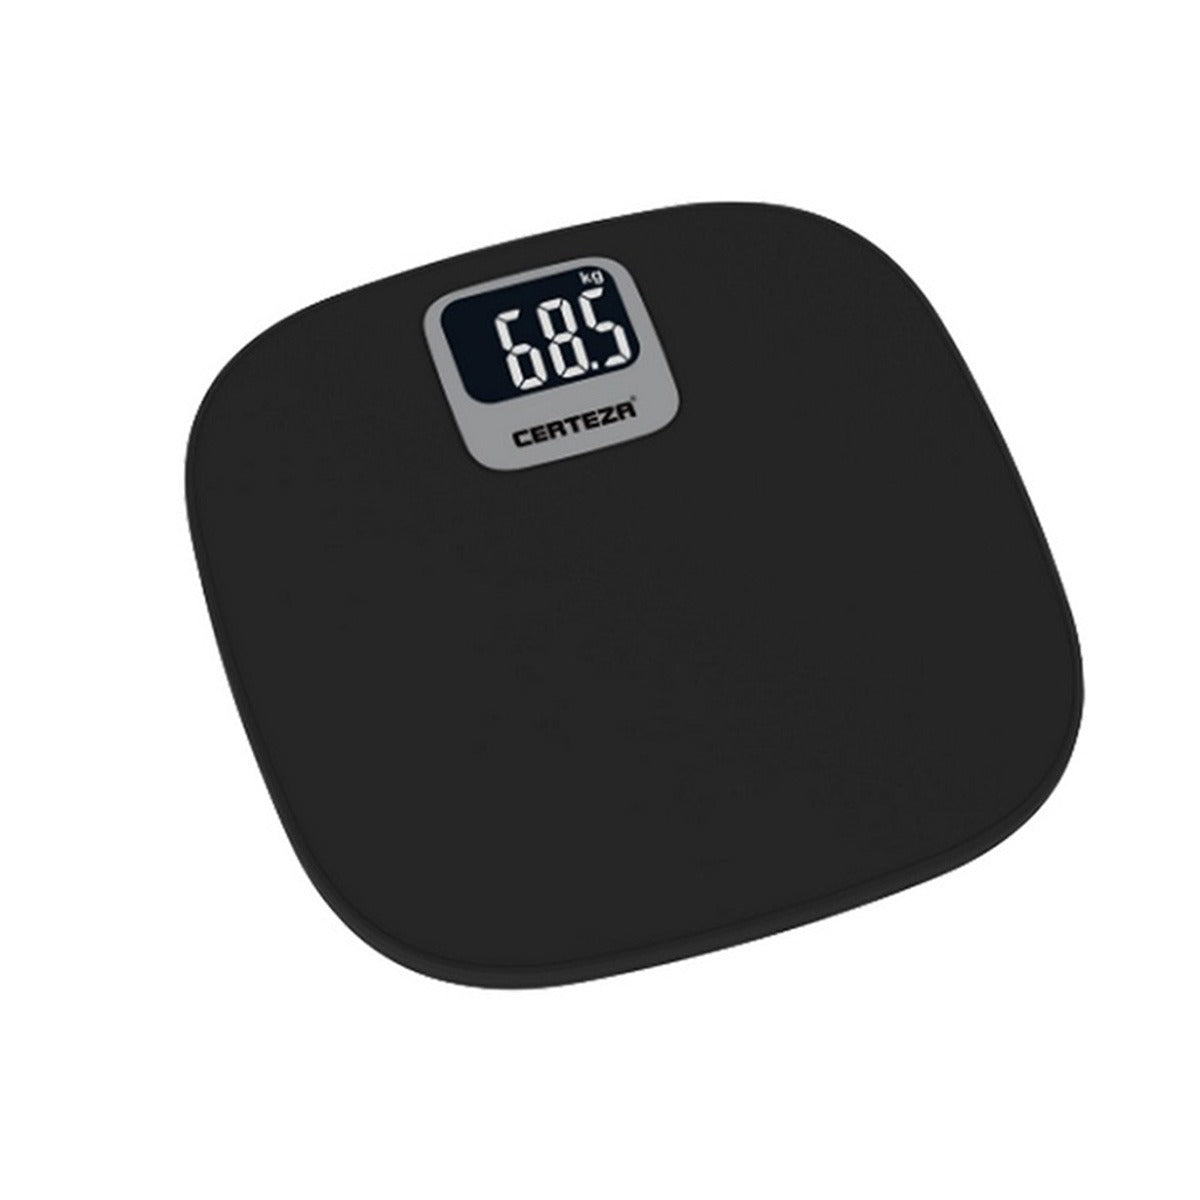 Certeza PS-812 - Digital Plastic Weighing Scale - Certeza Digital Plastic Body Weighing Scale in Pakistan